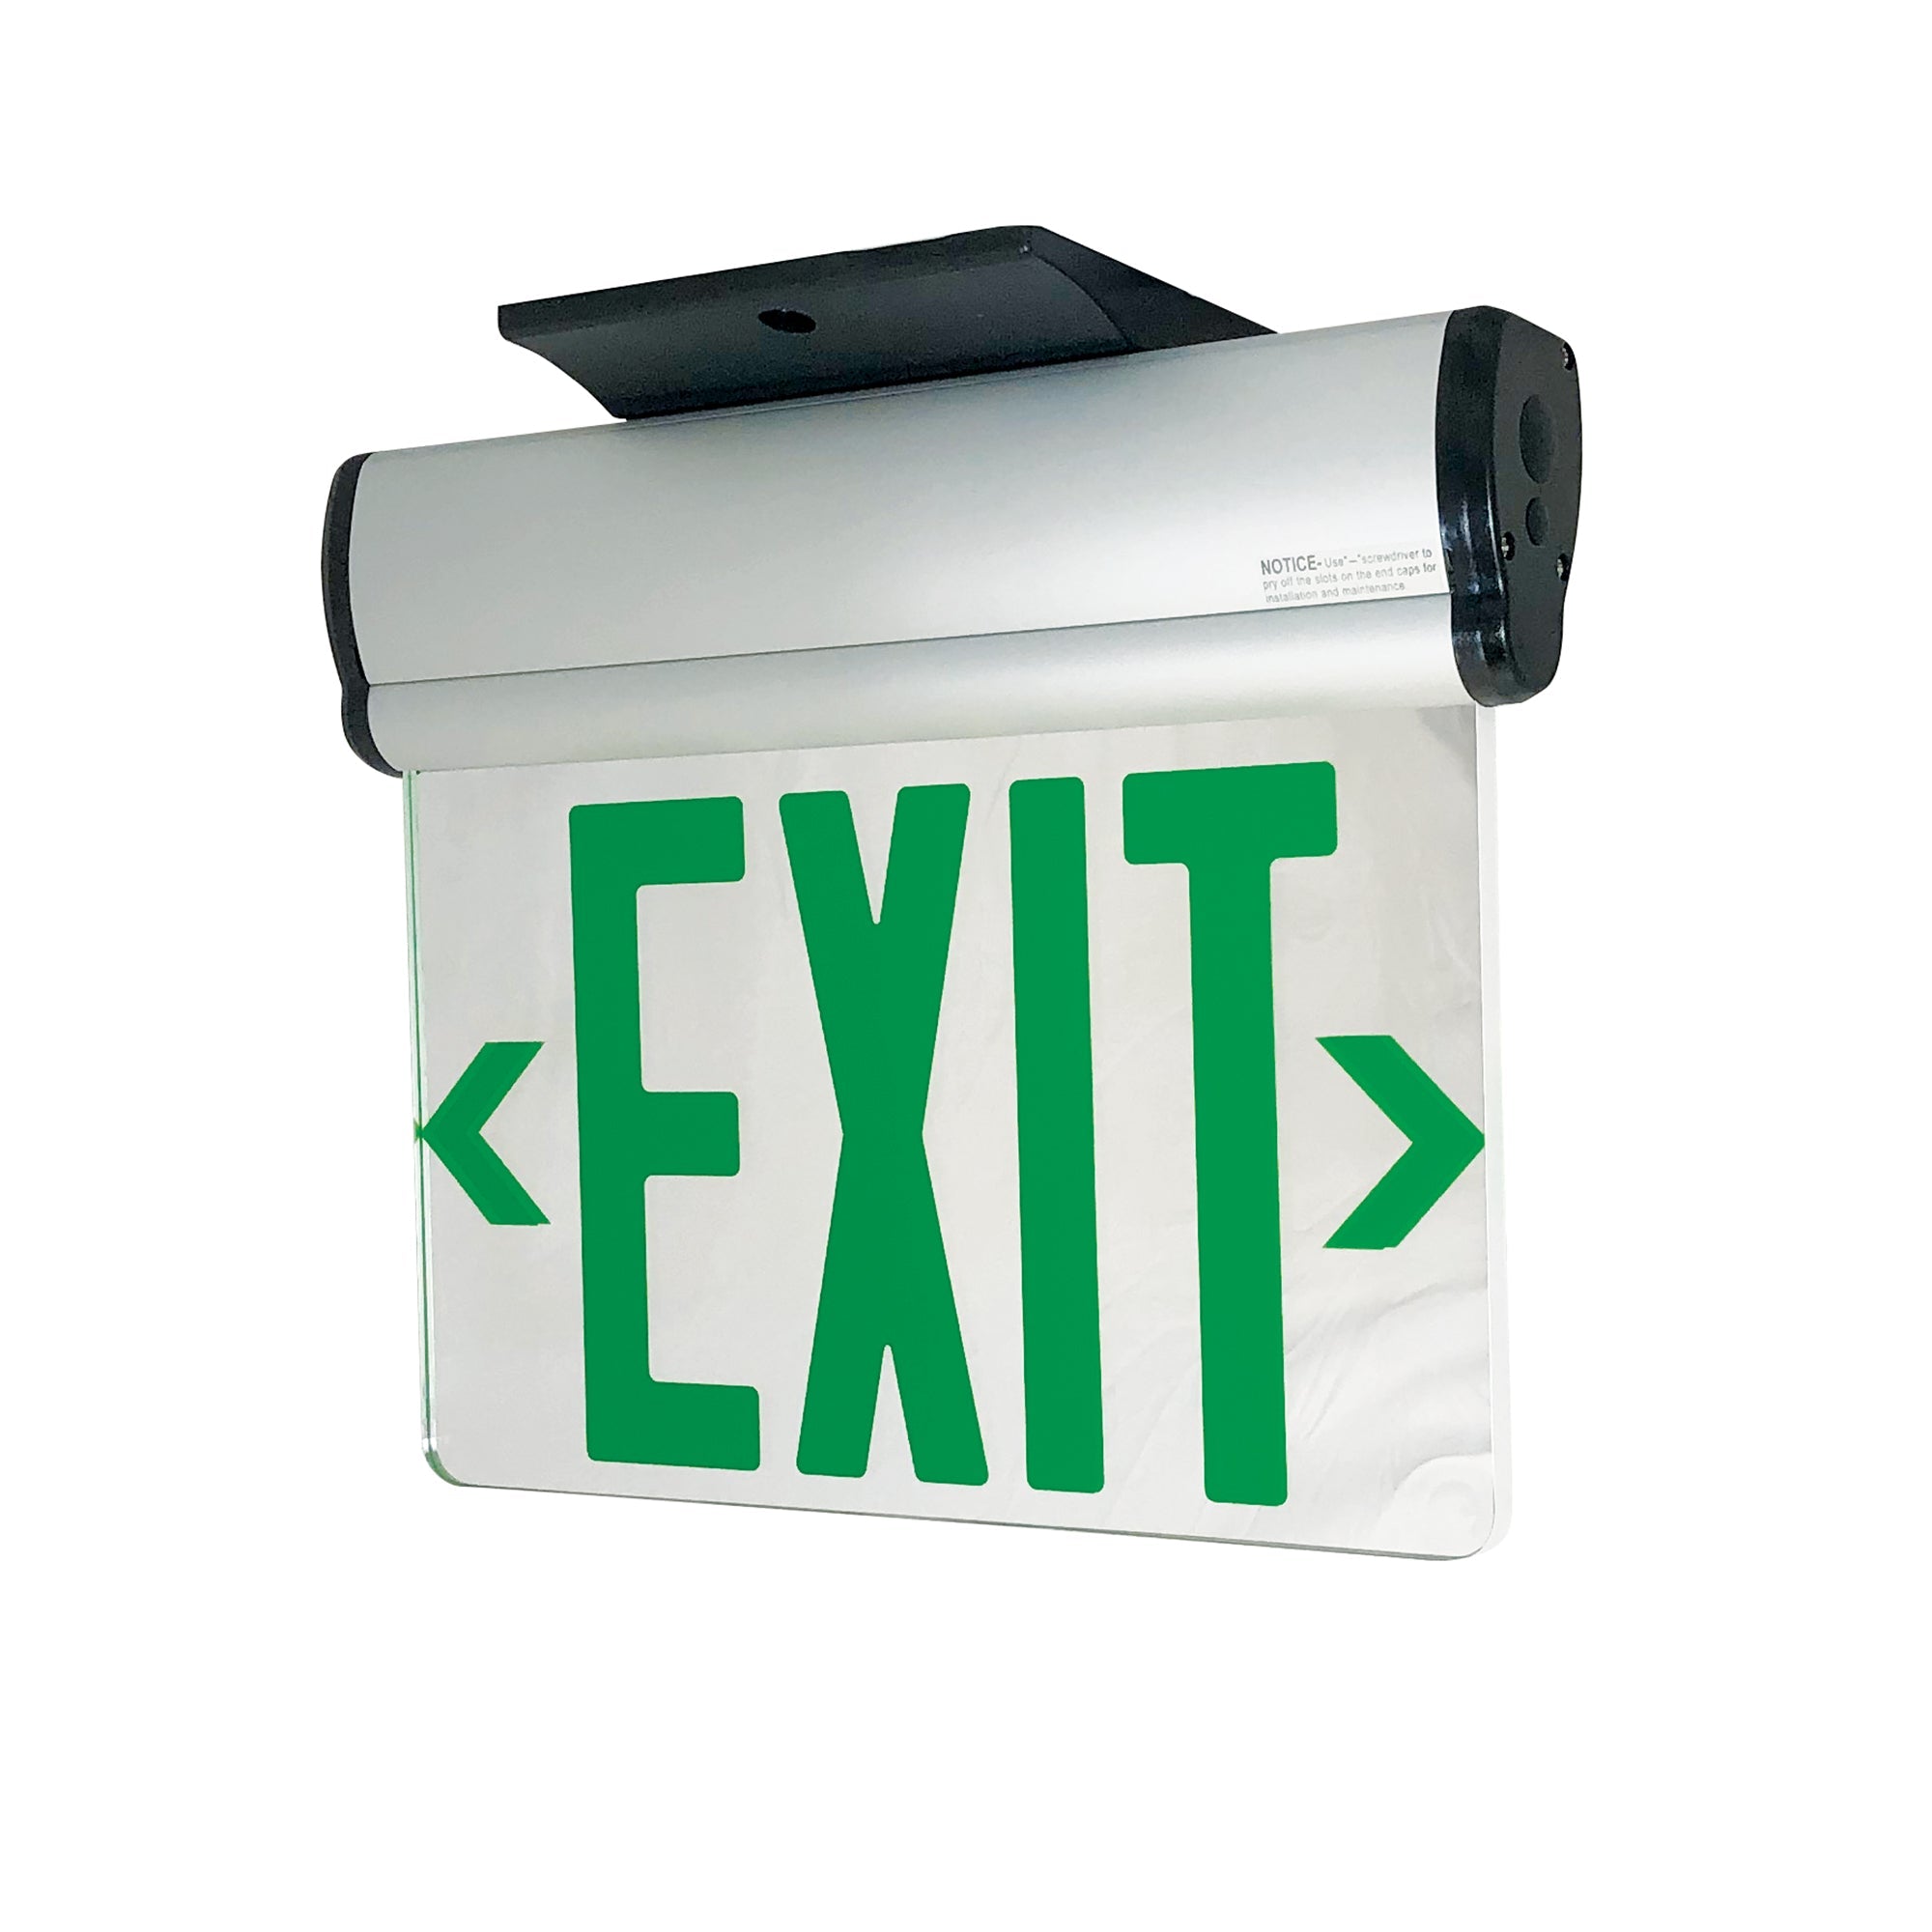 Nora Lighting NX-811-LEDGMA - Exit / Emergency - Surface Adjustable LED Edge-Lit Exit Sign, 2 Circuit, 6 Inch Green Letters, Single Face / Mirrored Acrylic, Aluminum Housing